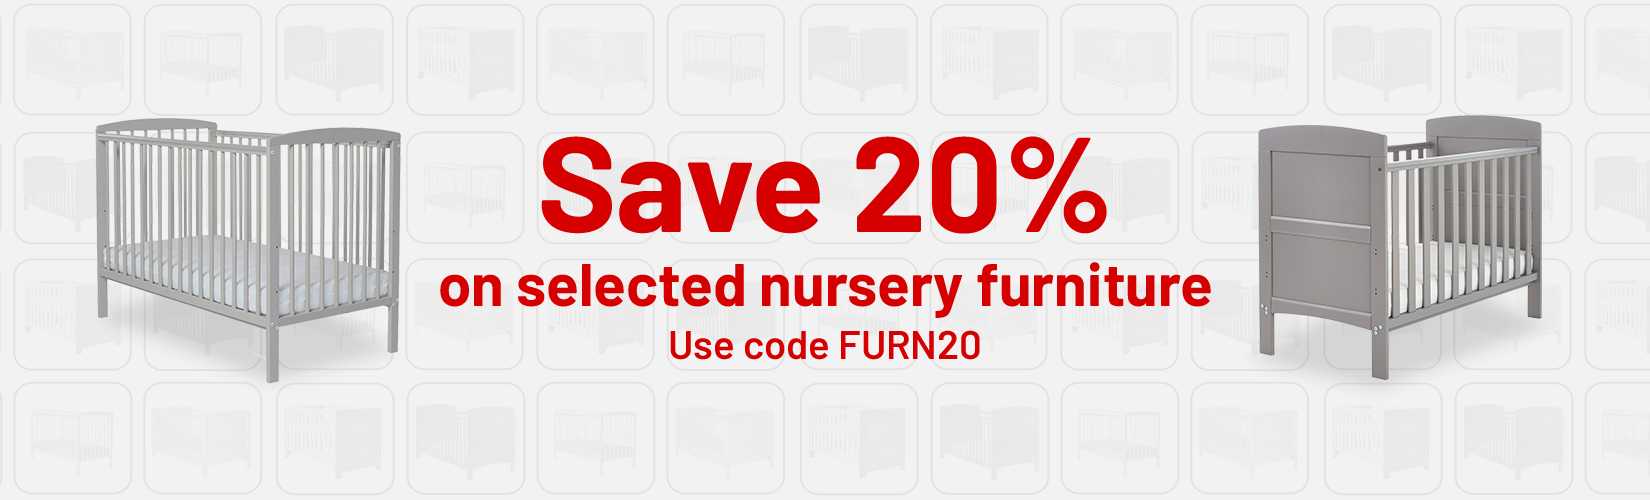 Save 20% on selected nursery furniture with code FURN20. Apply code at checkout.